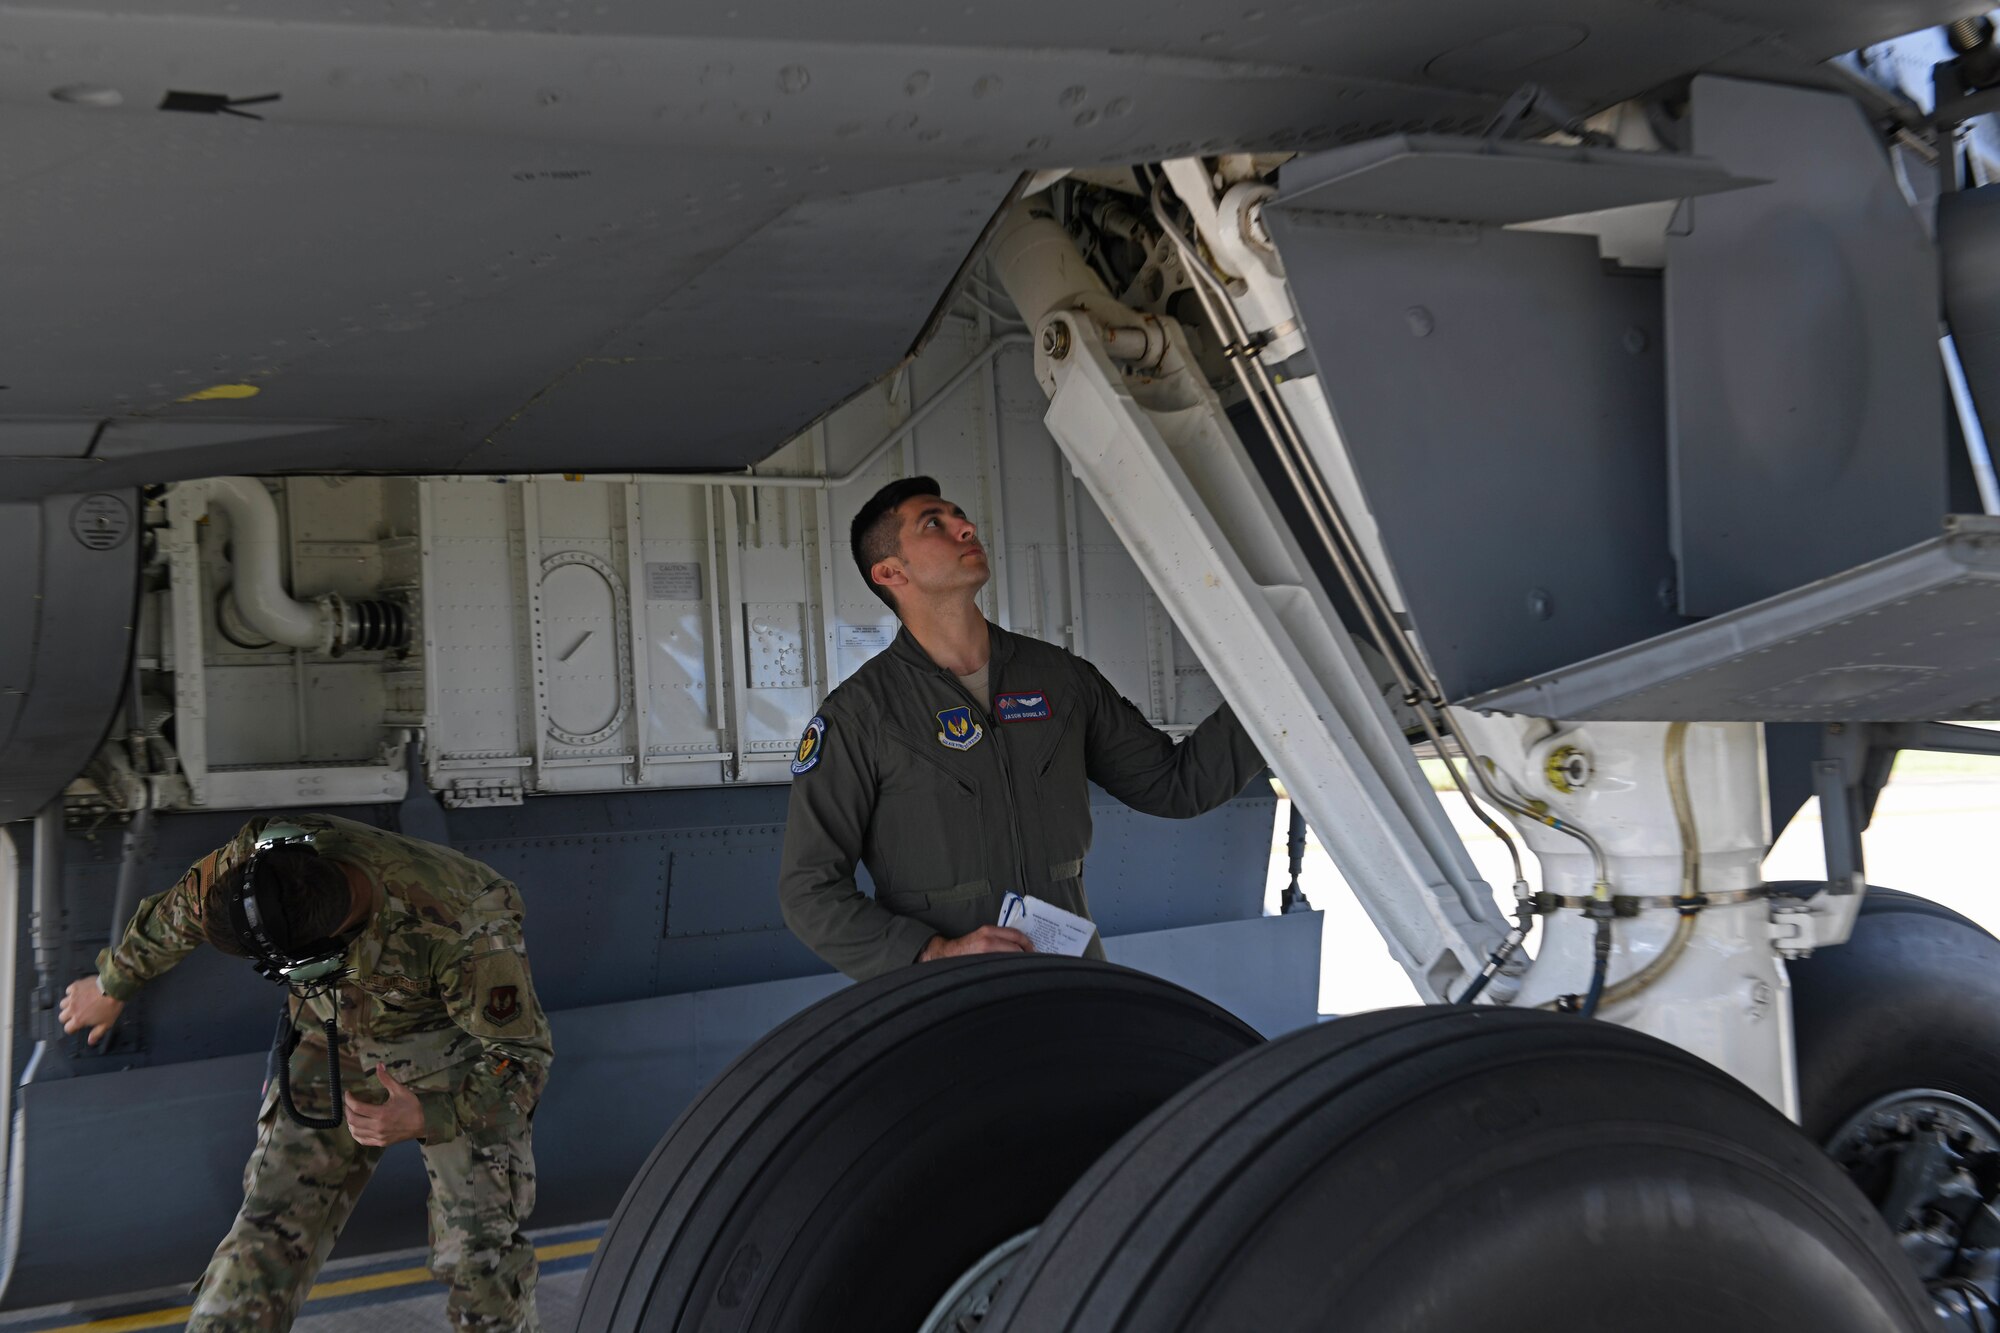 U.S. Air Force Capt. Jason Douglas, 351st Air Refueling Squadron pilot, looks over landing gear while performing a walk-around of a 351st ARS KC-135 Stratotanker prior to take-off during the “FURIOUS 48” readiness exercise at RAF Mildenhall, England, April 24, 2019. Exercise scenarios were designed to ensure 100th ARW Airmen were fully prepared for potential contingencies in the wing’s area of responsibility. (U.S. Air Force photo by Senior Airman Luke Milano)